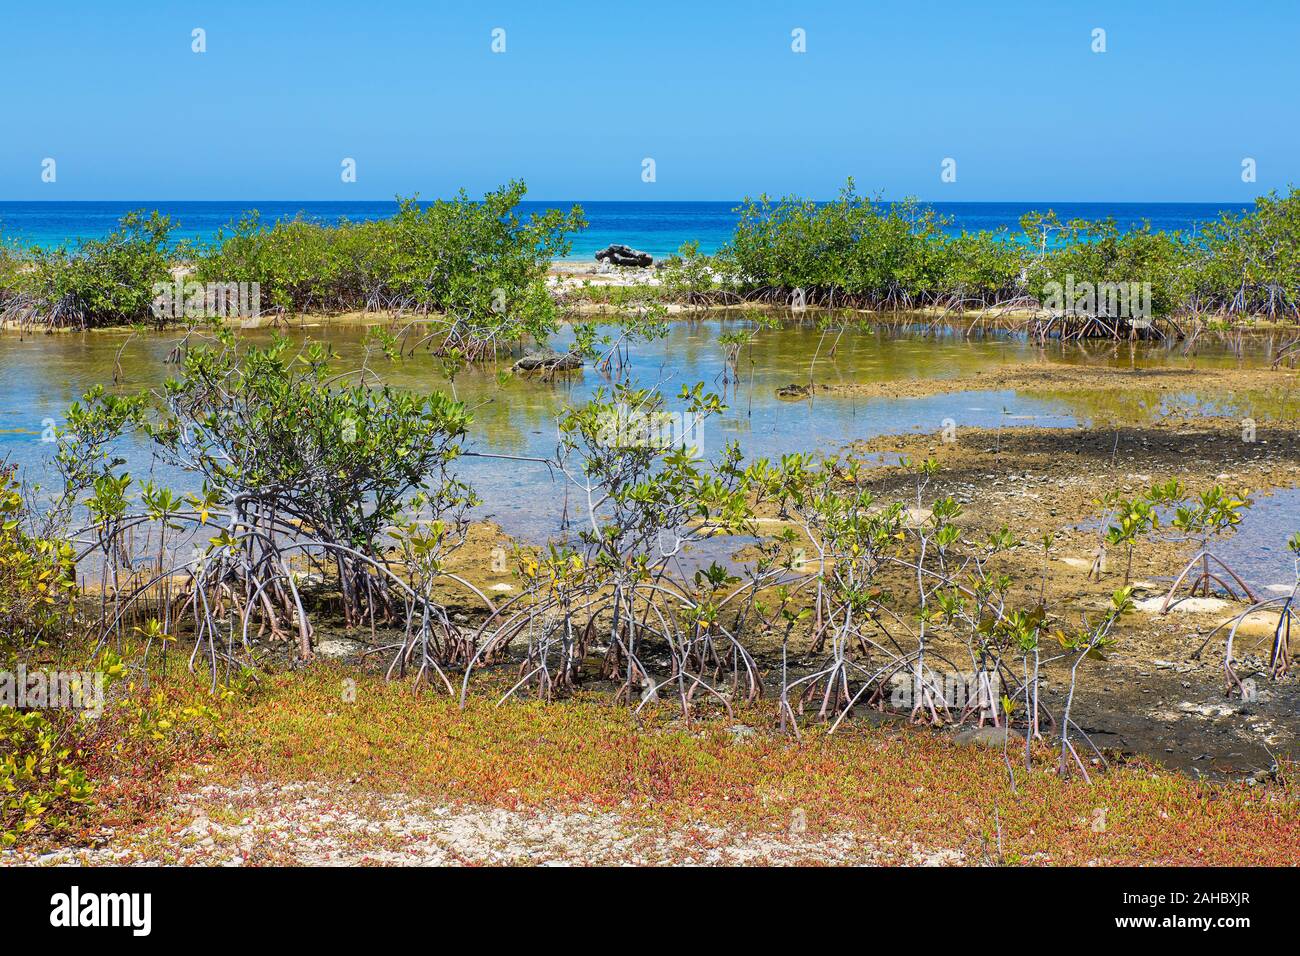 Landscape with mangrove plants at shore of island Bonaire Stock Photo